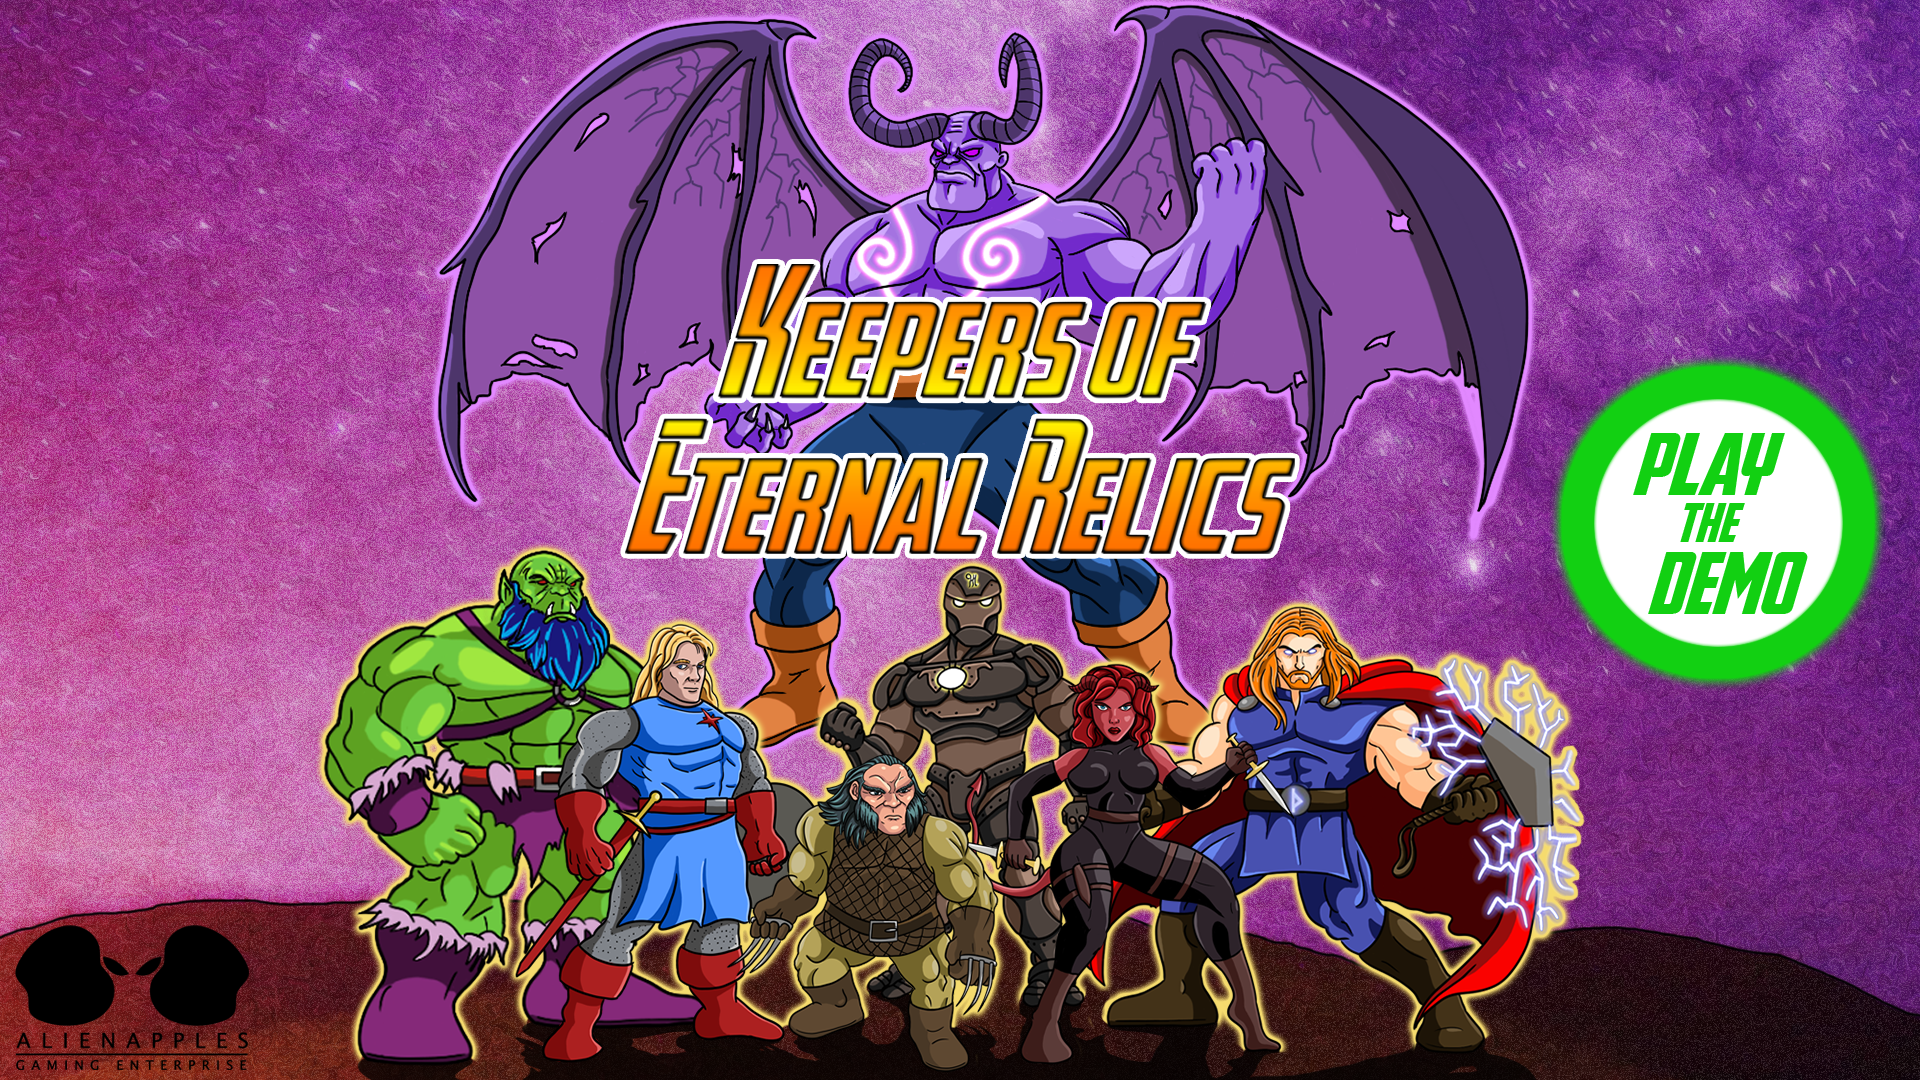 Keepers of Eternal Relics